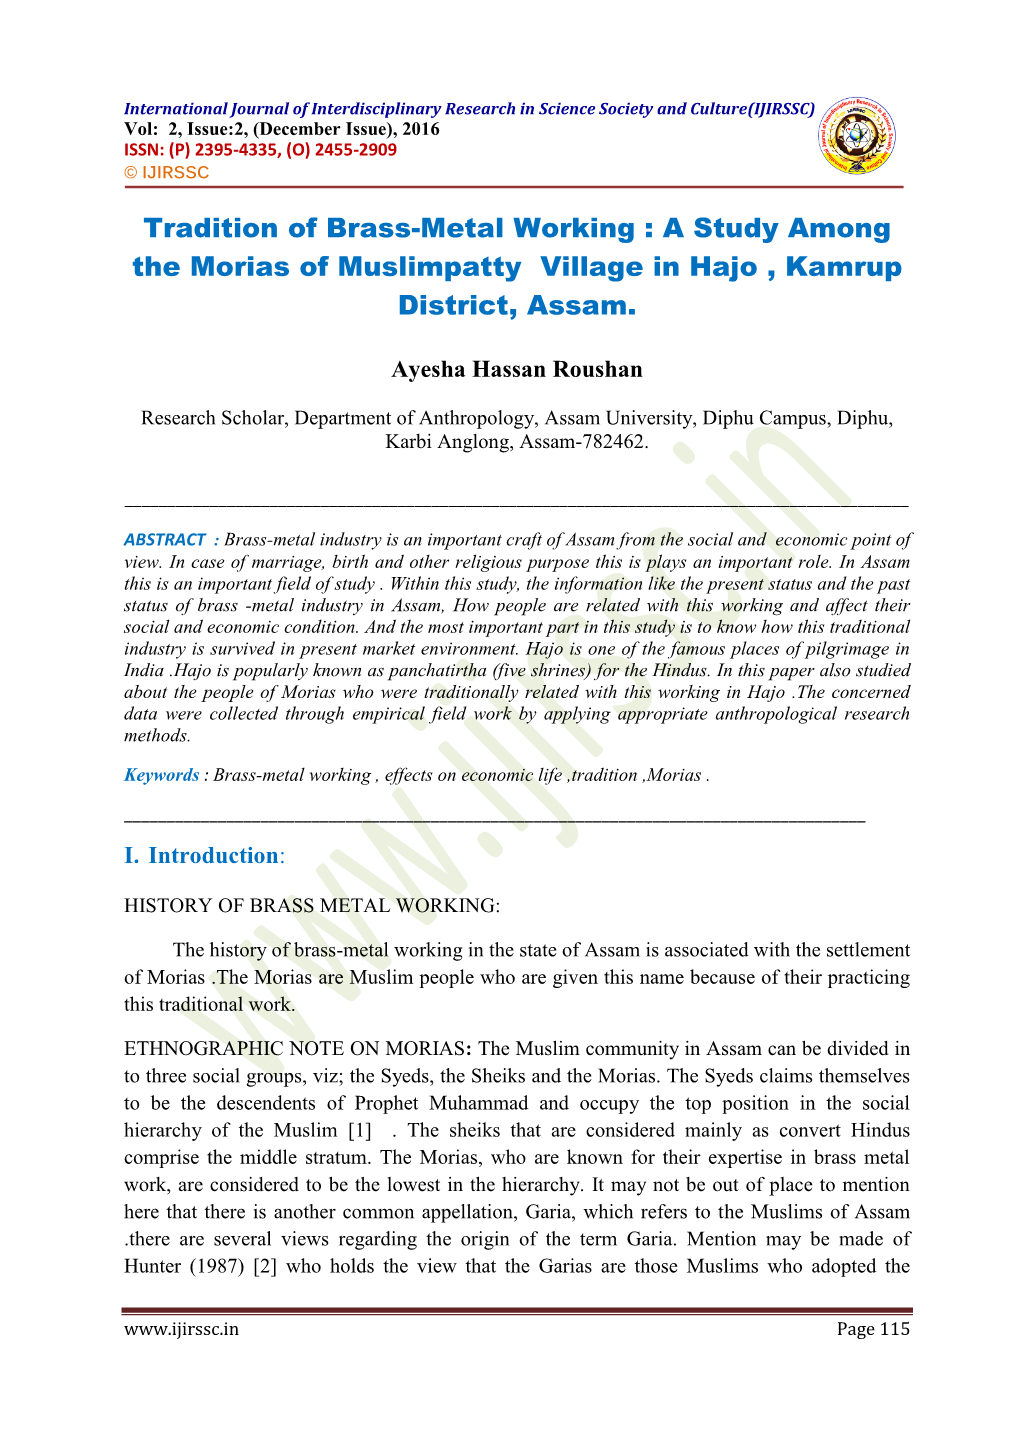 Tradition of Brass-Metal Working : a Study Among the Morias of Muslimpatty Village in Hajo , Kamrup District, Assam